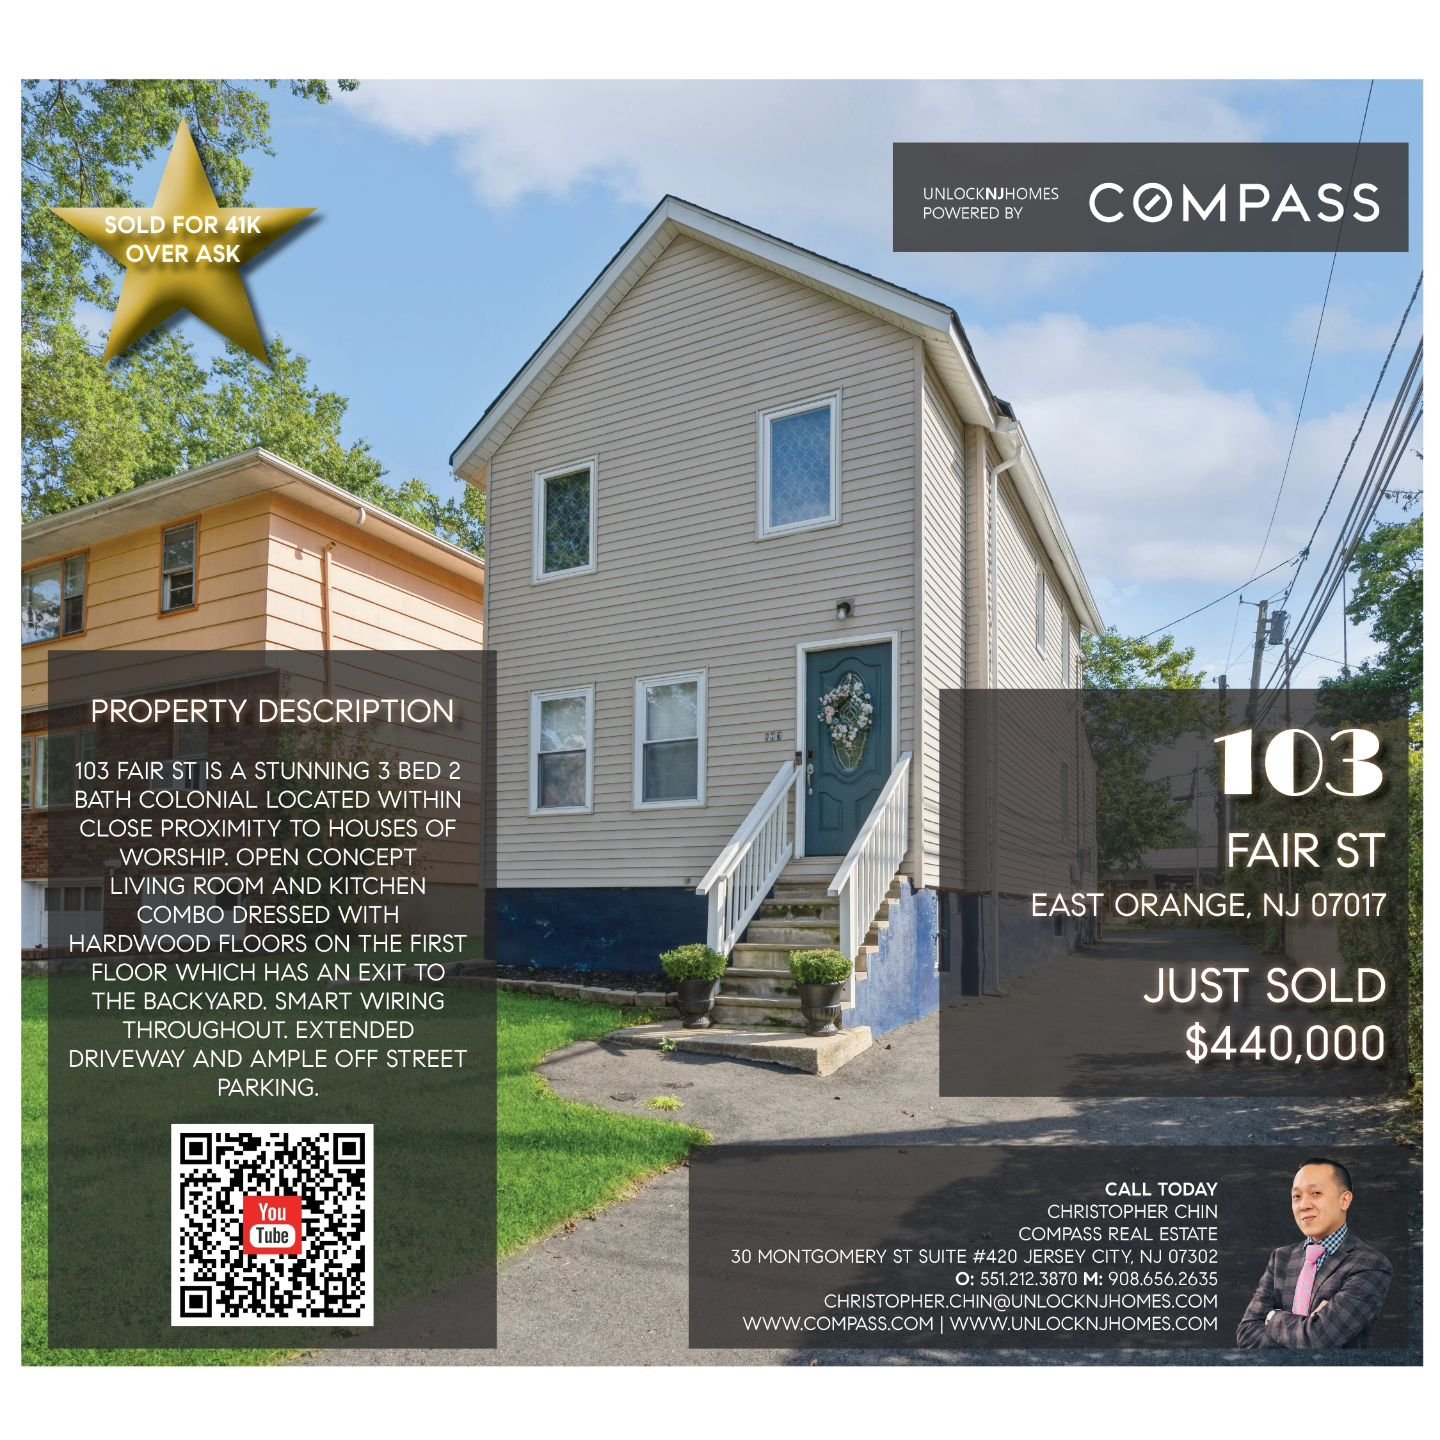 The best way to end the year is by selling 2 houses in 1 month! Thank you to my amazing team! 

@compassnewjersey @compass @unlocknjhomes 

#unlocknjhomes #compassrealestate #compassnj #njrealtor #HGTV #mdlny #realtorlife #realestate #realestateinsta